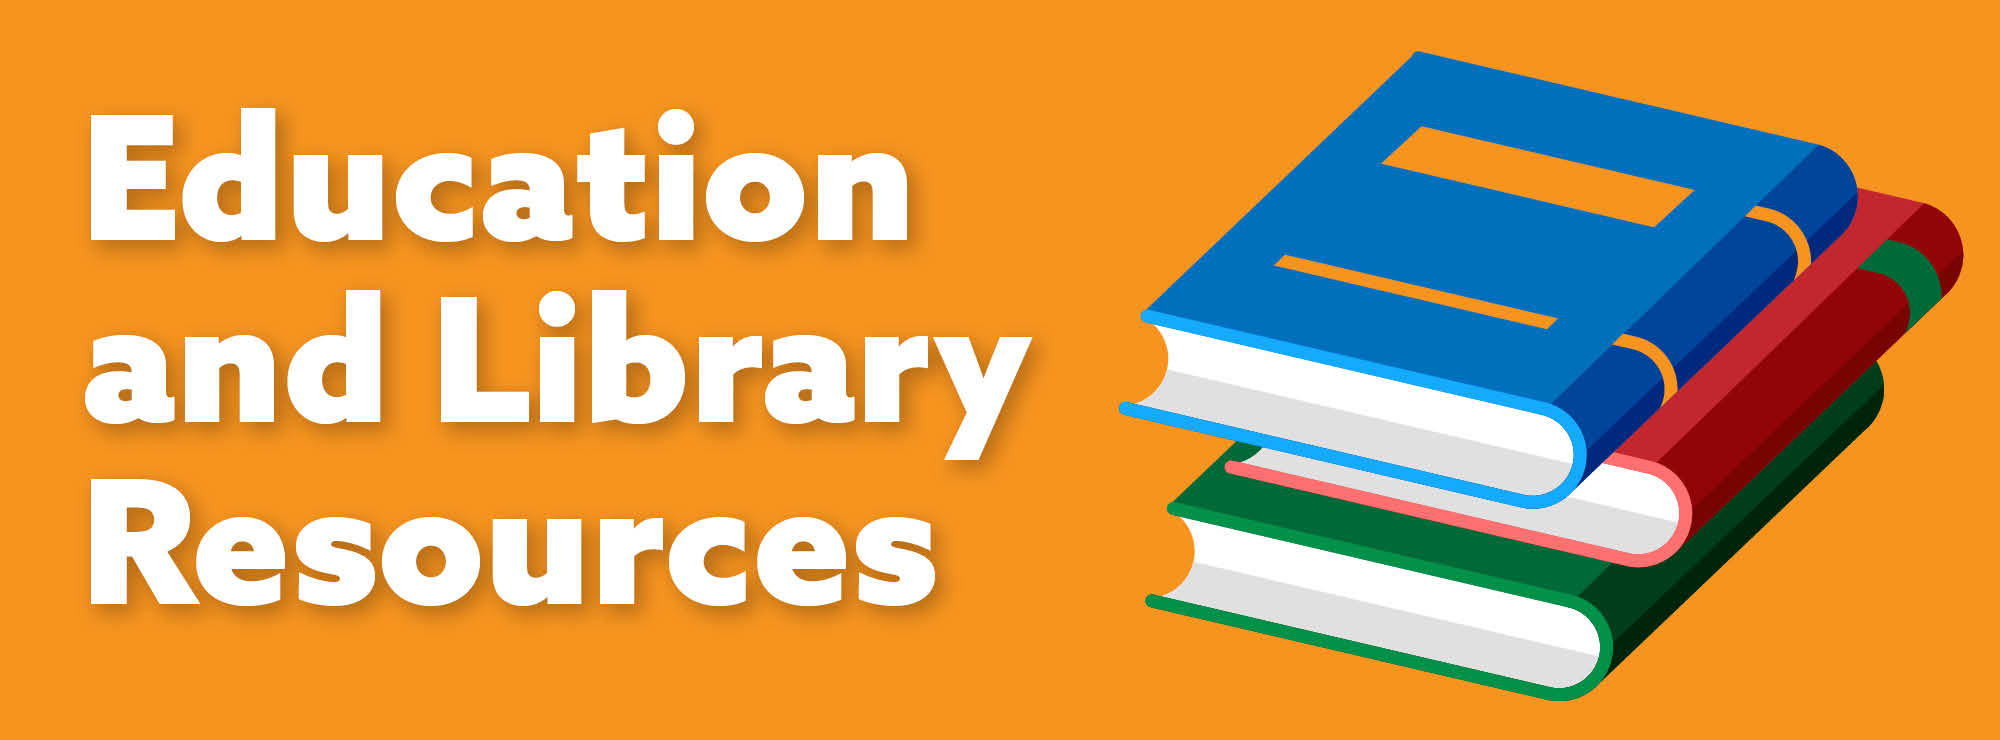 Education and Library Resources